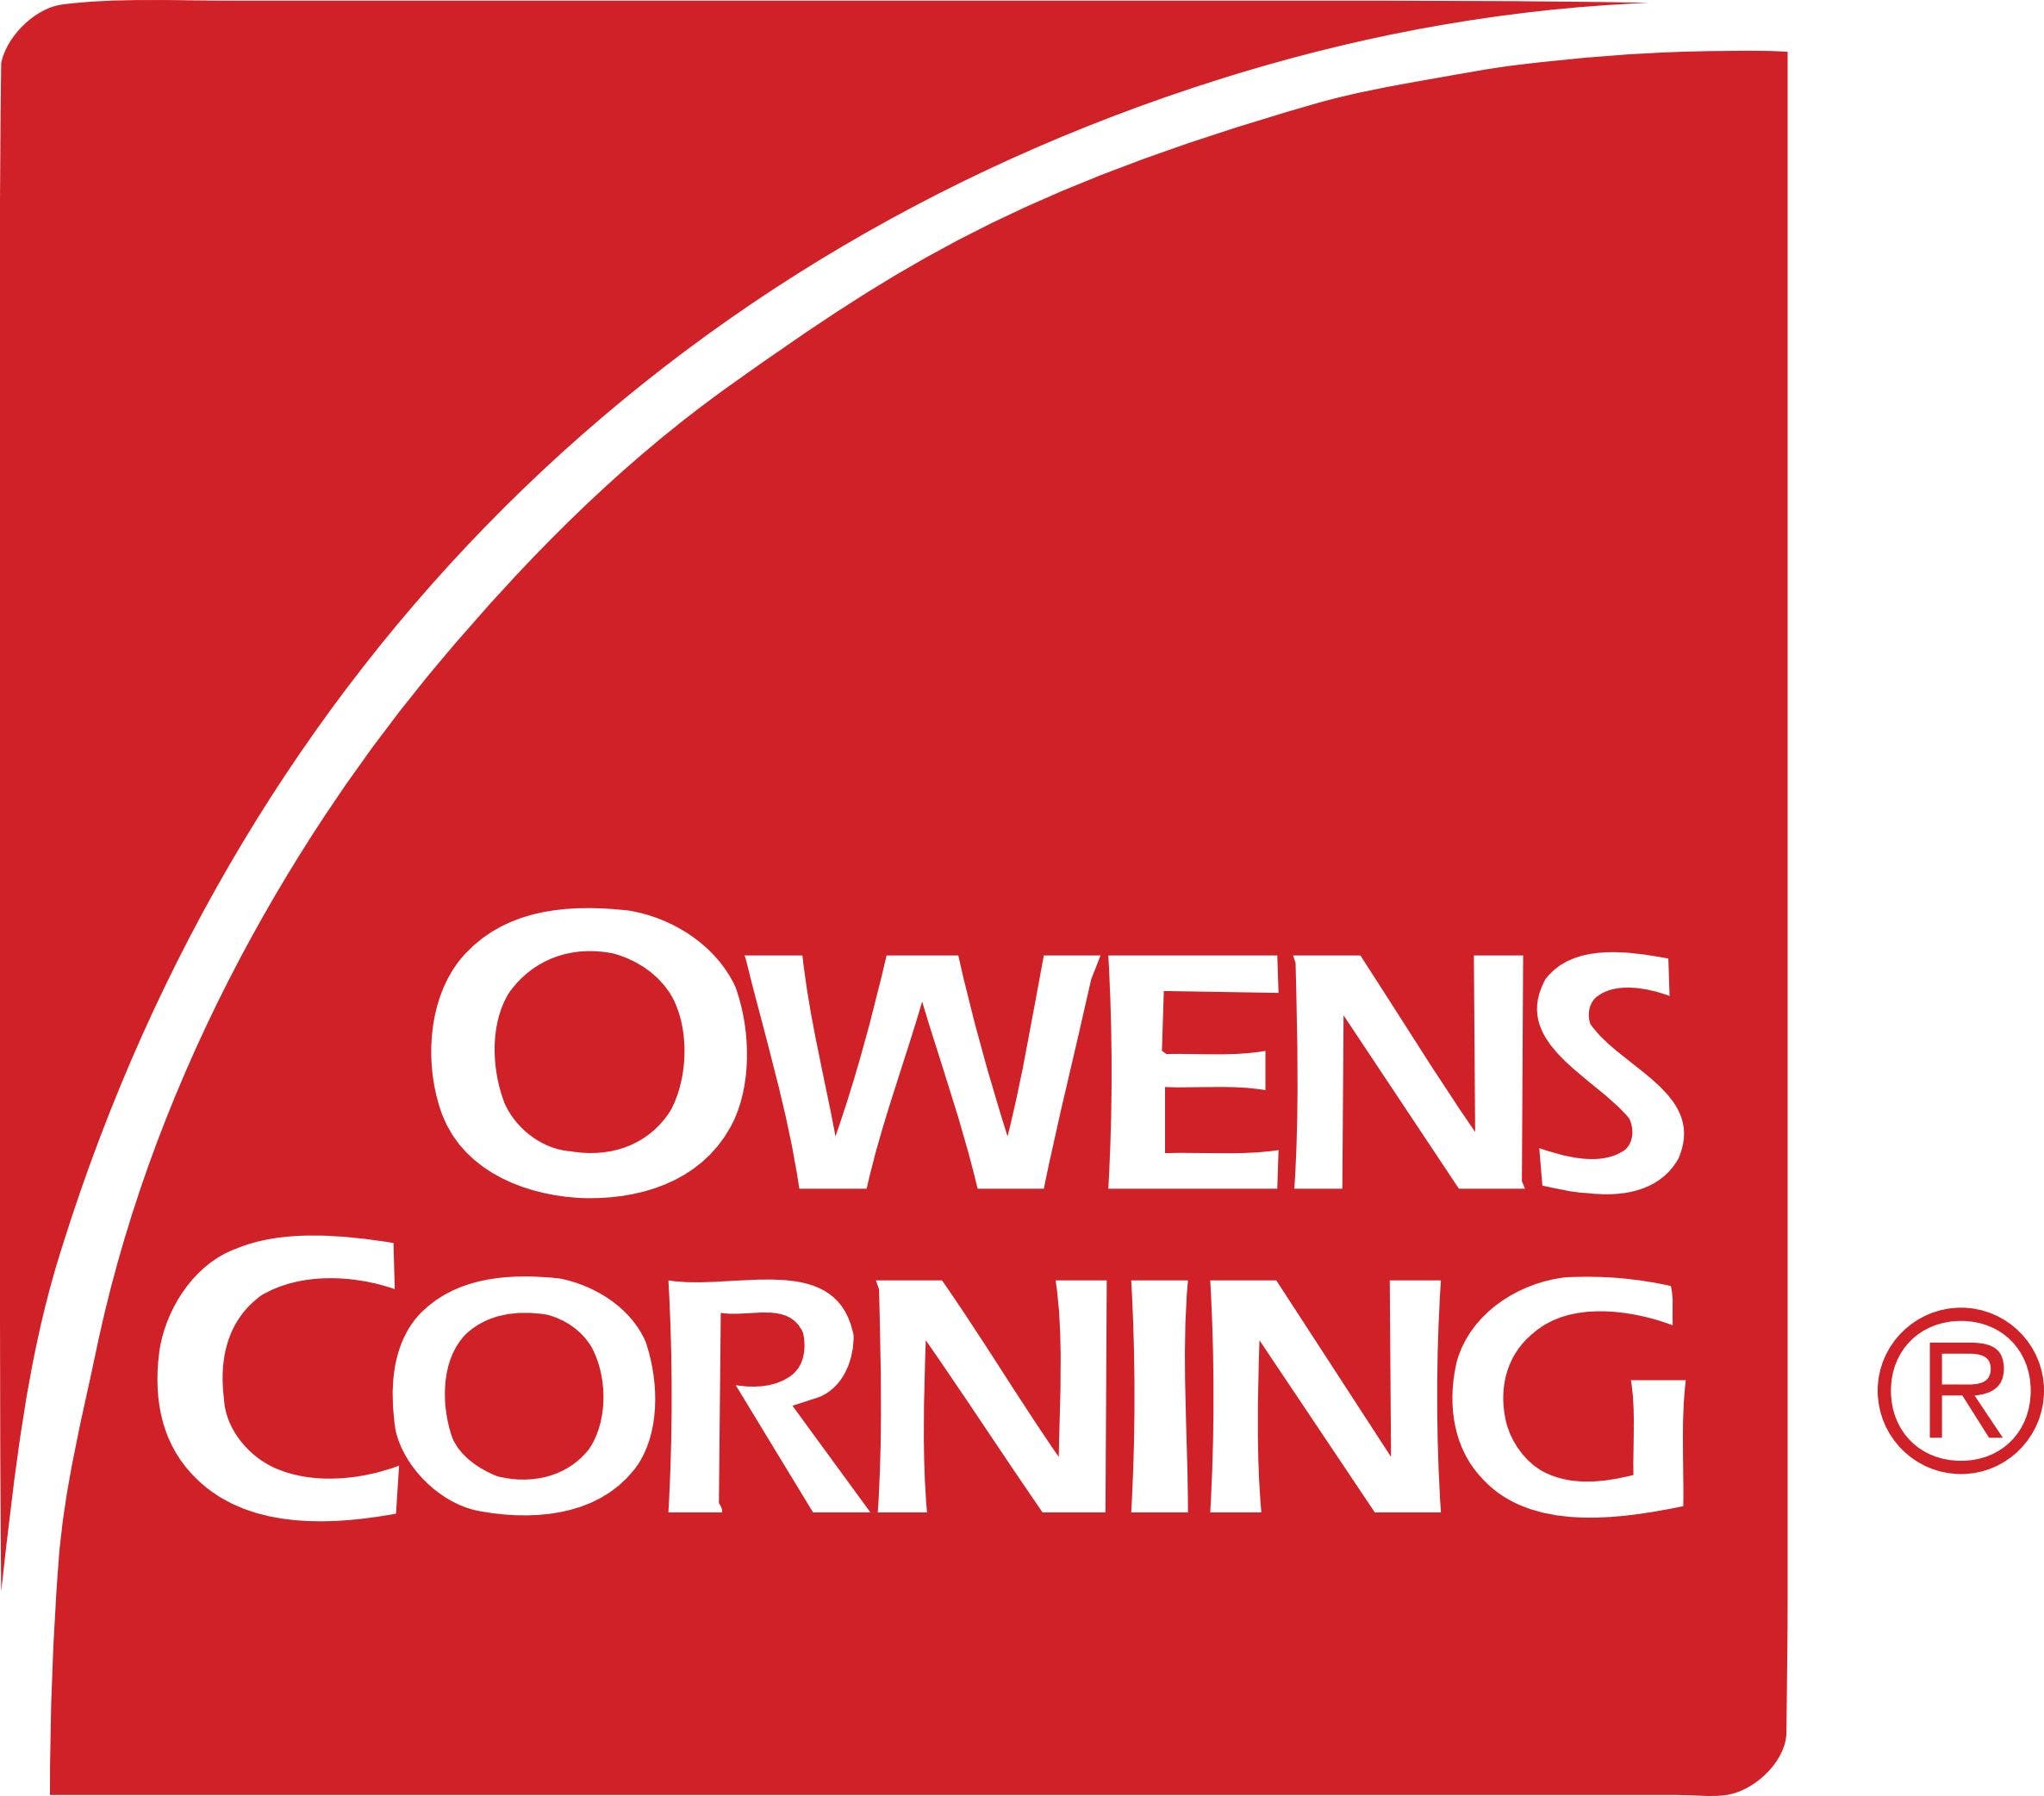 pays $238M for former Owens Corning factory site in Silicon Valley -  Silicon Valley Business Journal